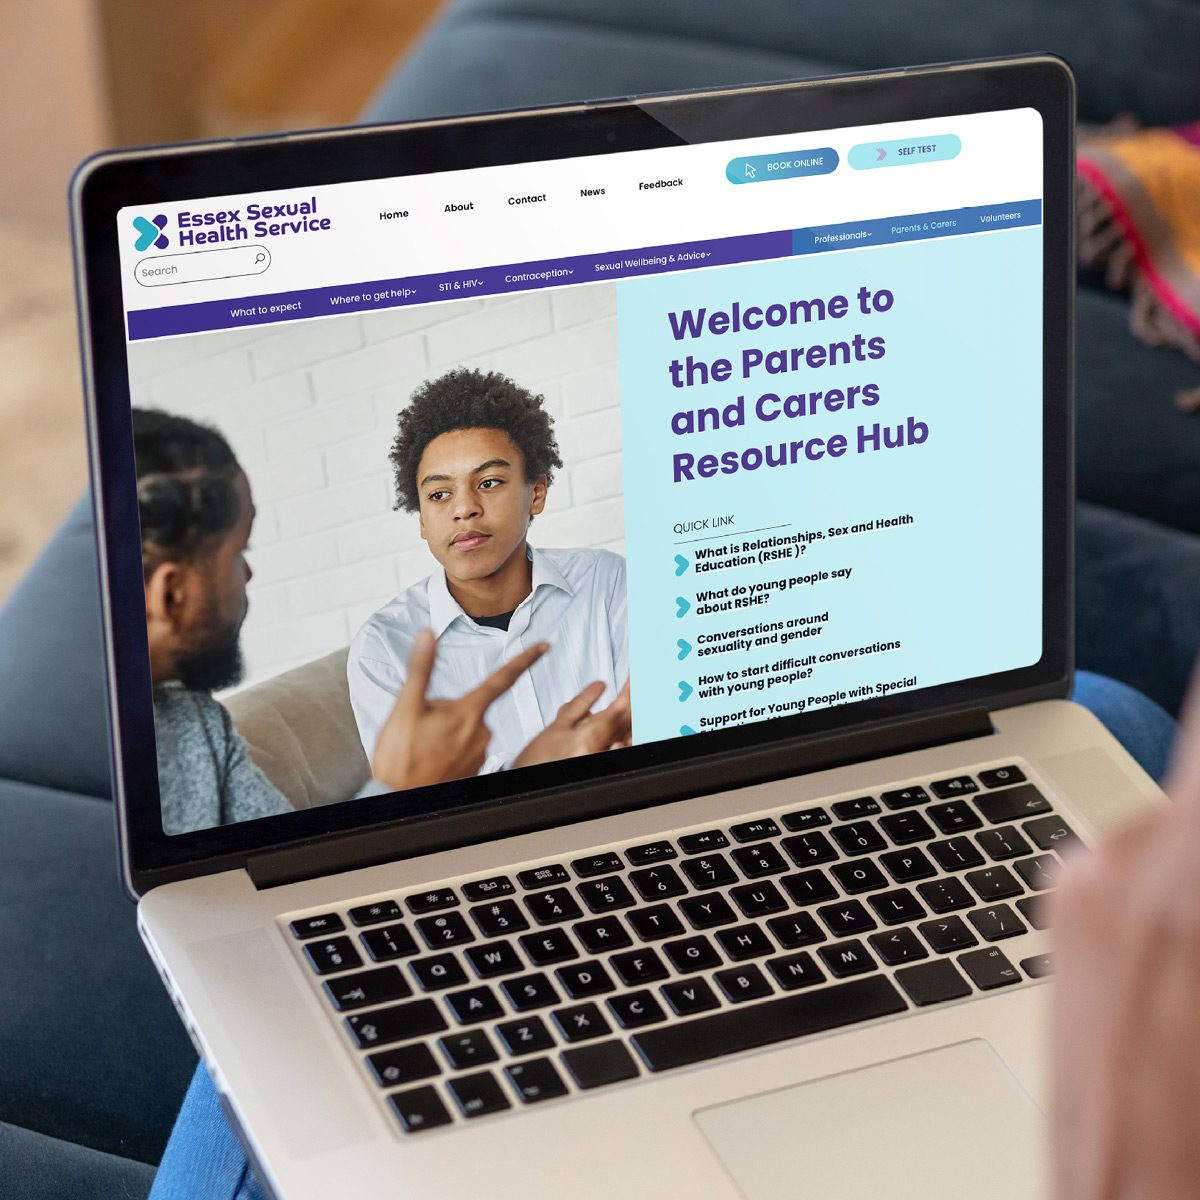 🌟 Exciting News for Parents and Carers! 🌟

The Essex Sexual Health website dedicated to parents and carers! 🎉

Discover all the tools you need in one place here: orlo.uk/suwZX

#EssexSexualHealth #ParentsAndCarers #SexualHealthEducation